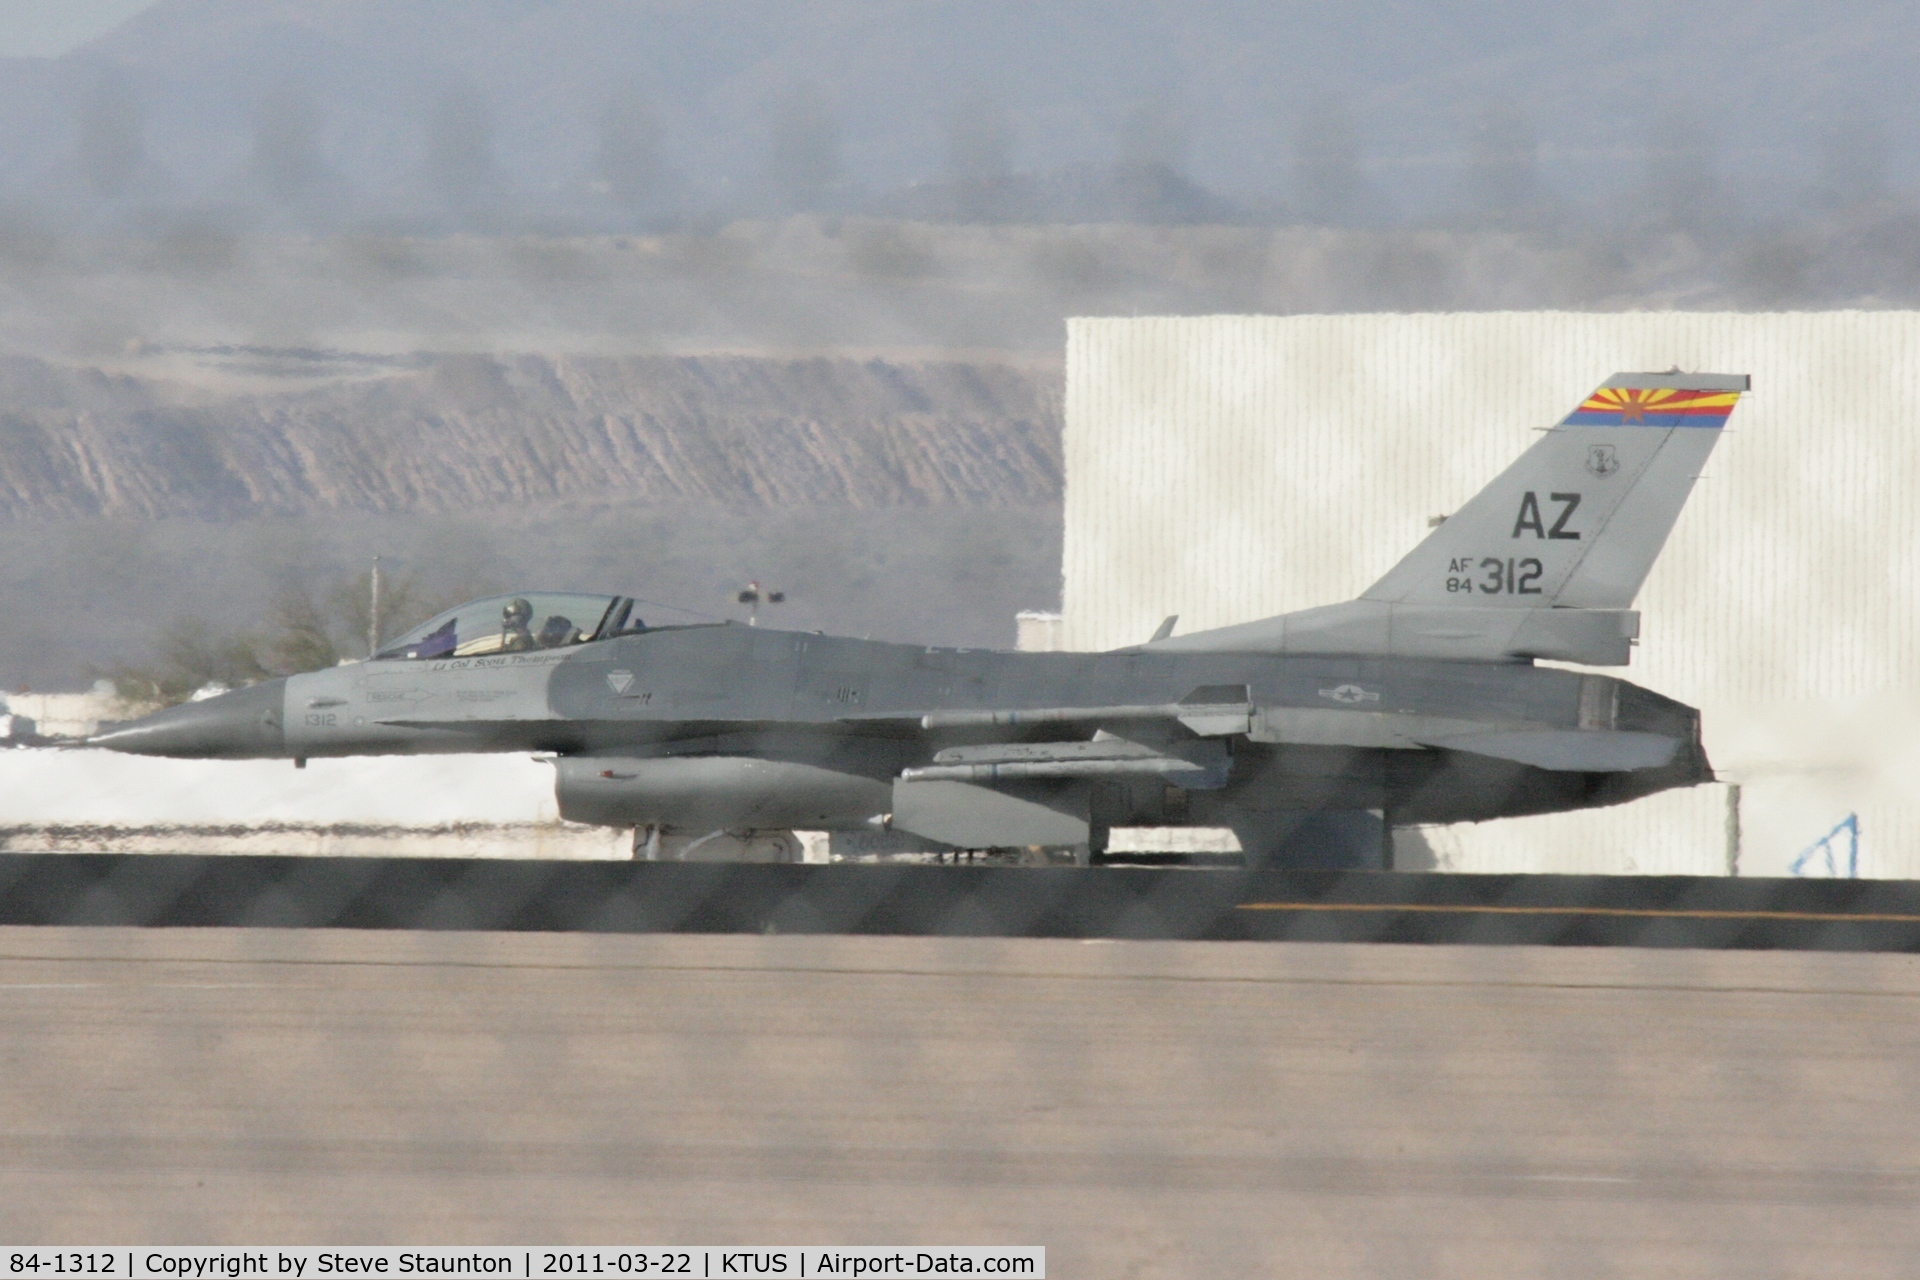 84-1312, 1984 General Dynamics F-16C C/N 5C-149, Taken at Tucson International Airport, in March 2011 whilst on an Aeroprint Aviation tour